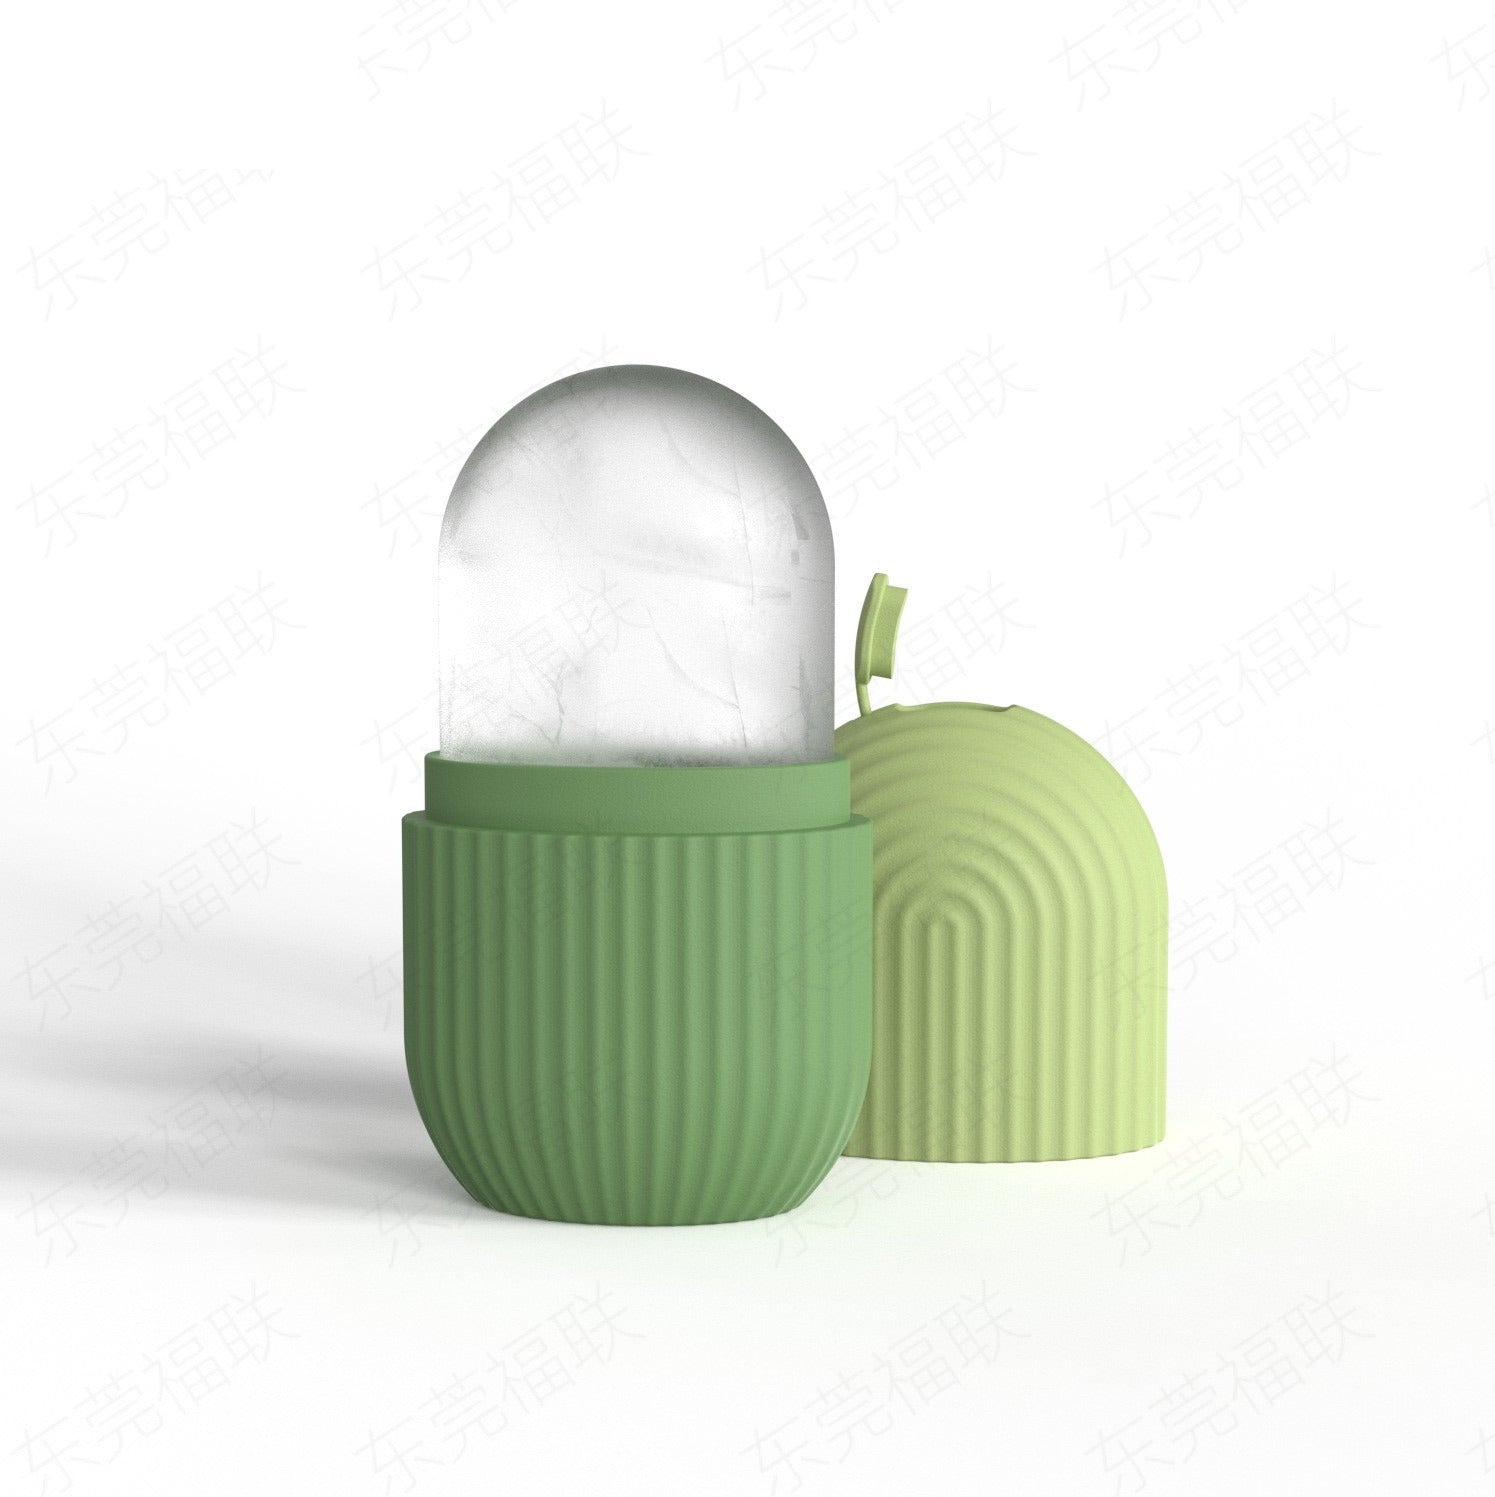 Silicone Ice Roller Massager in green color